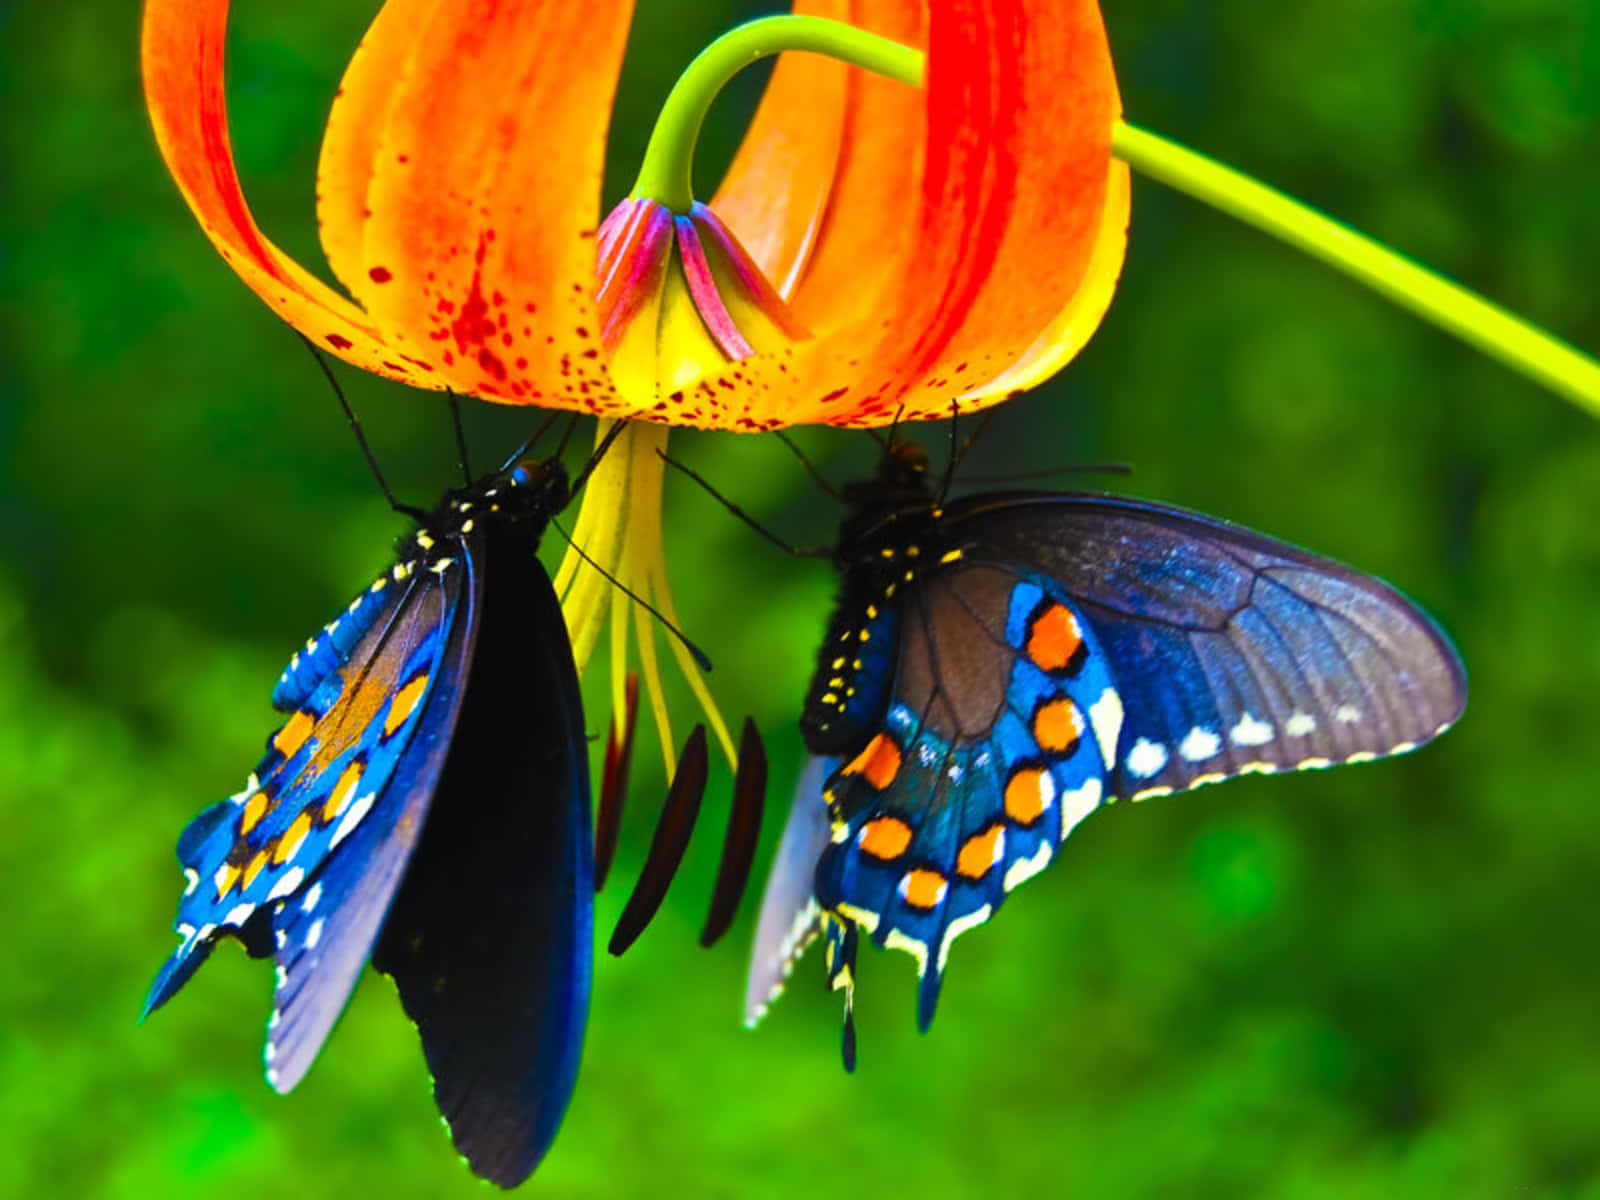 "All The Colors of an Emerging Butterfly" Wallpaper